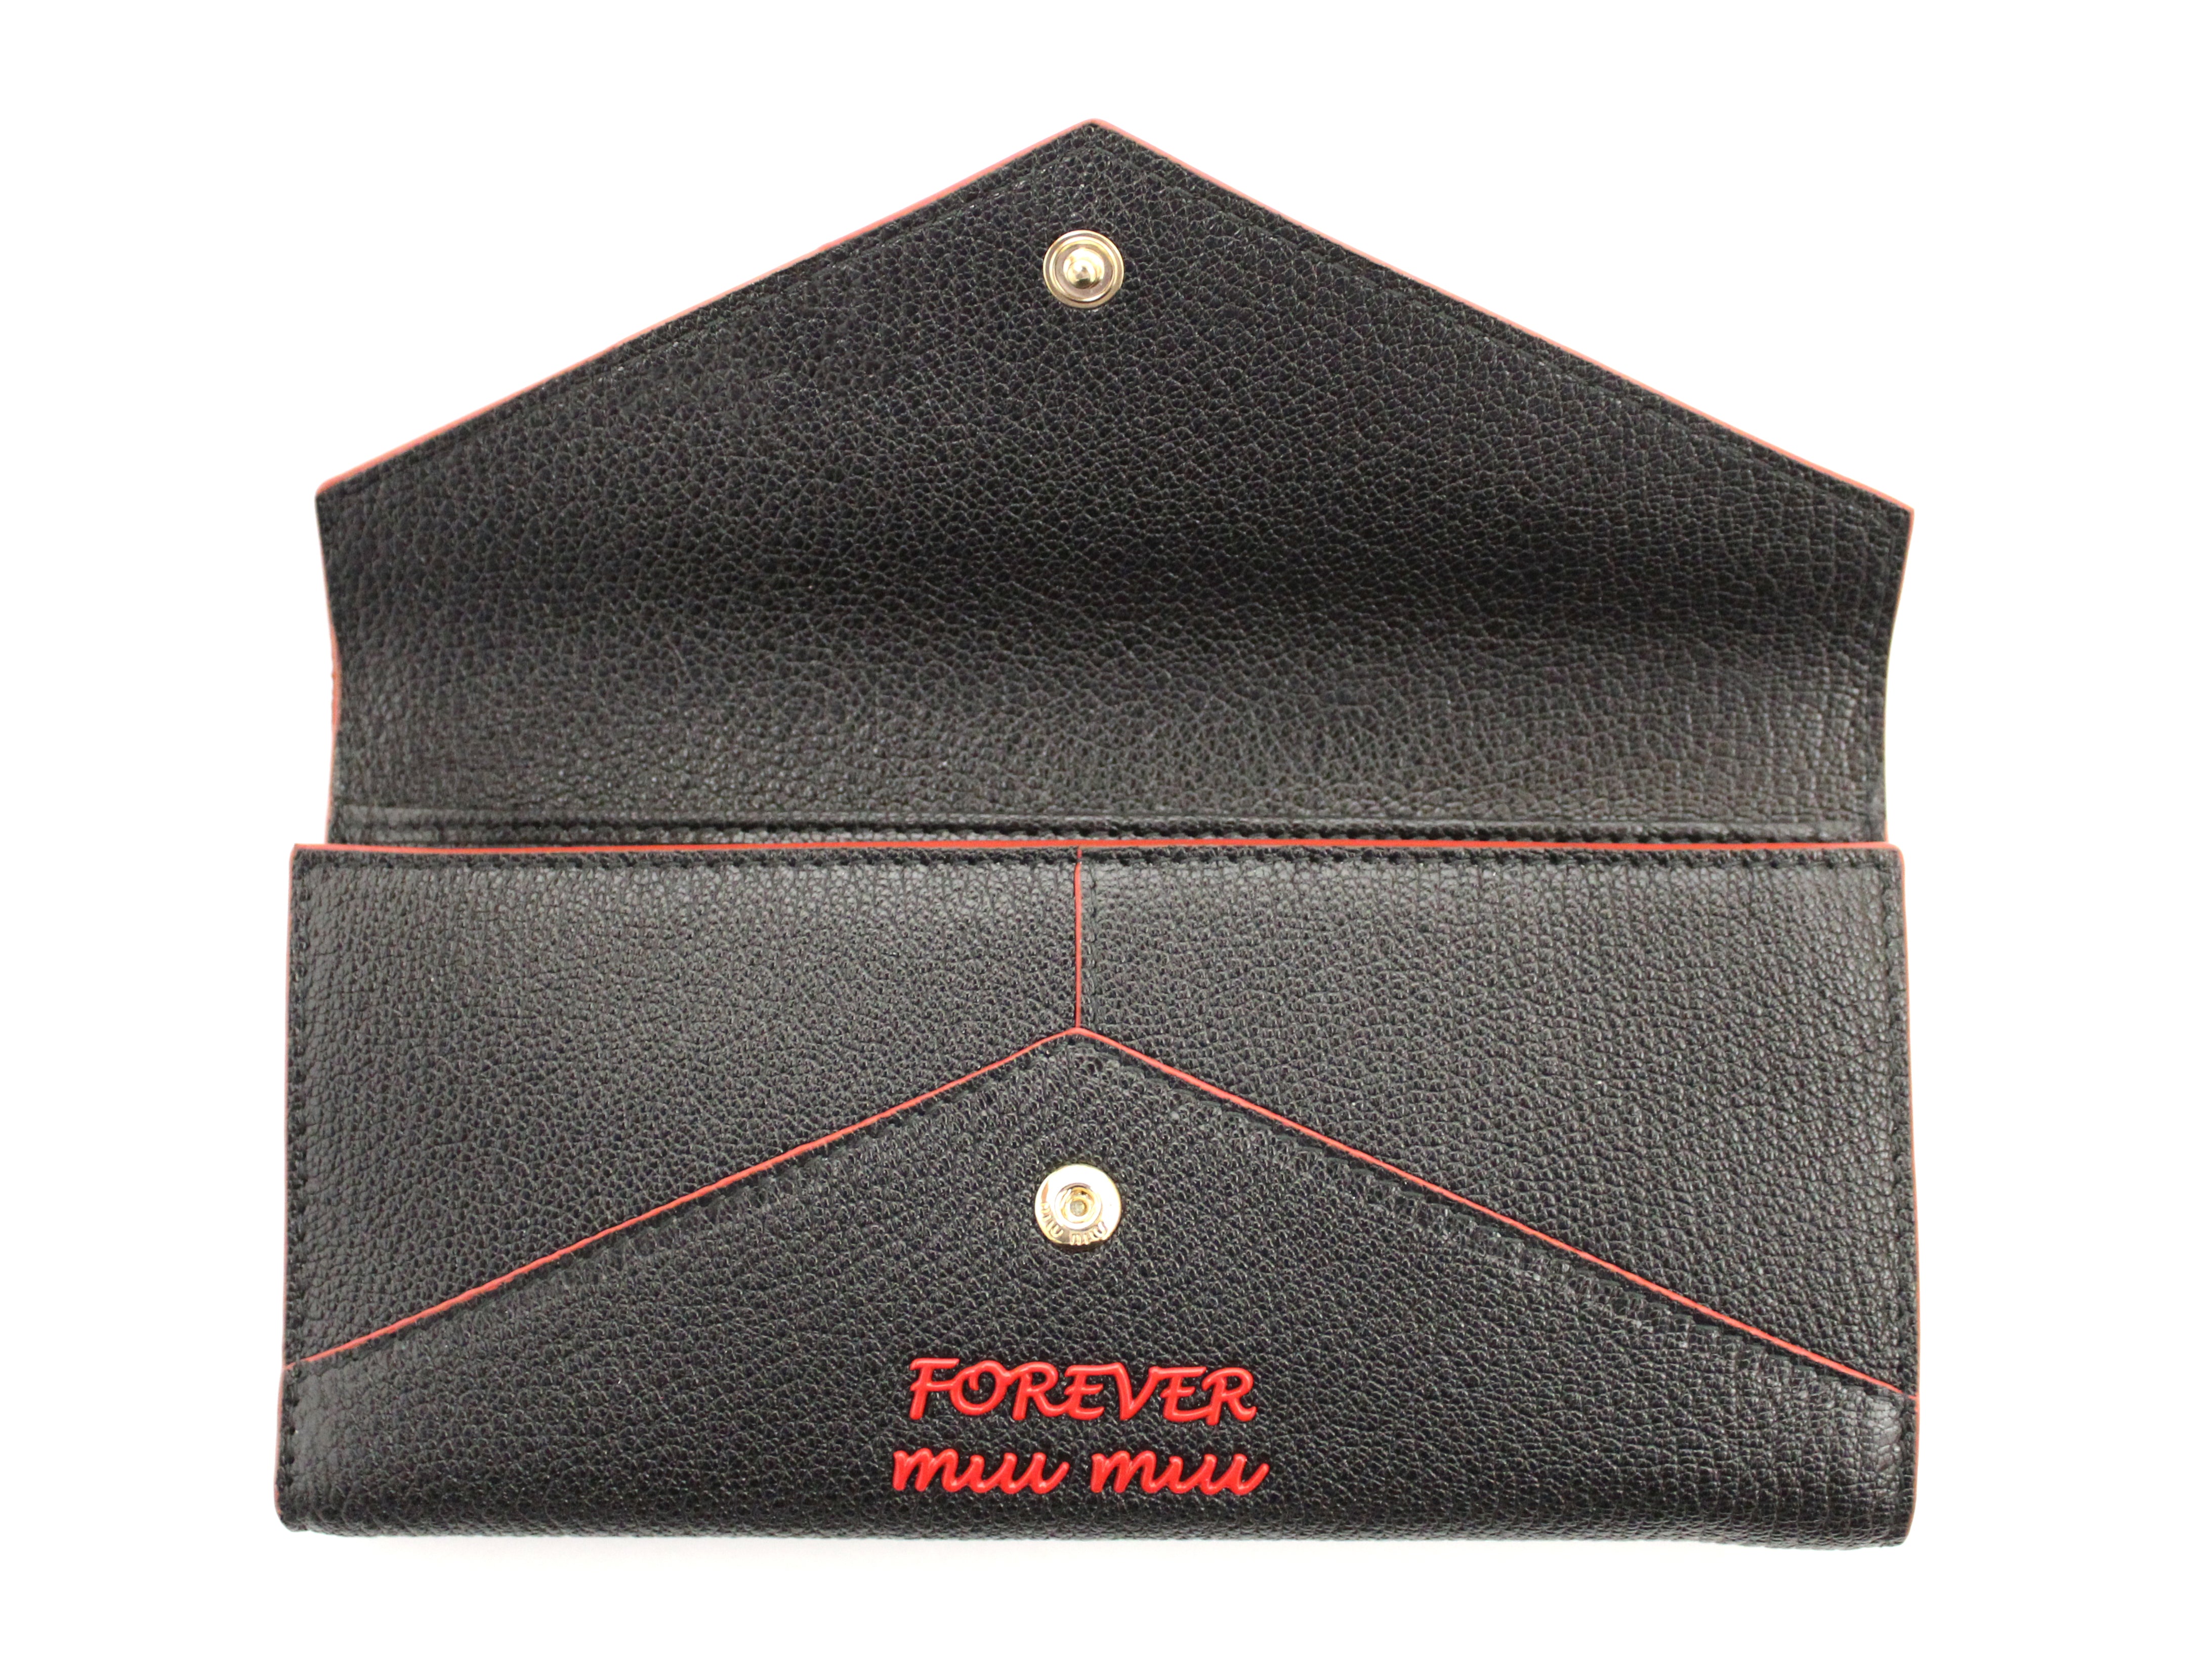 Authentic New Miu Miu Black Leather Madras Forever Love Long Wallet 5MH013